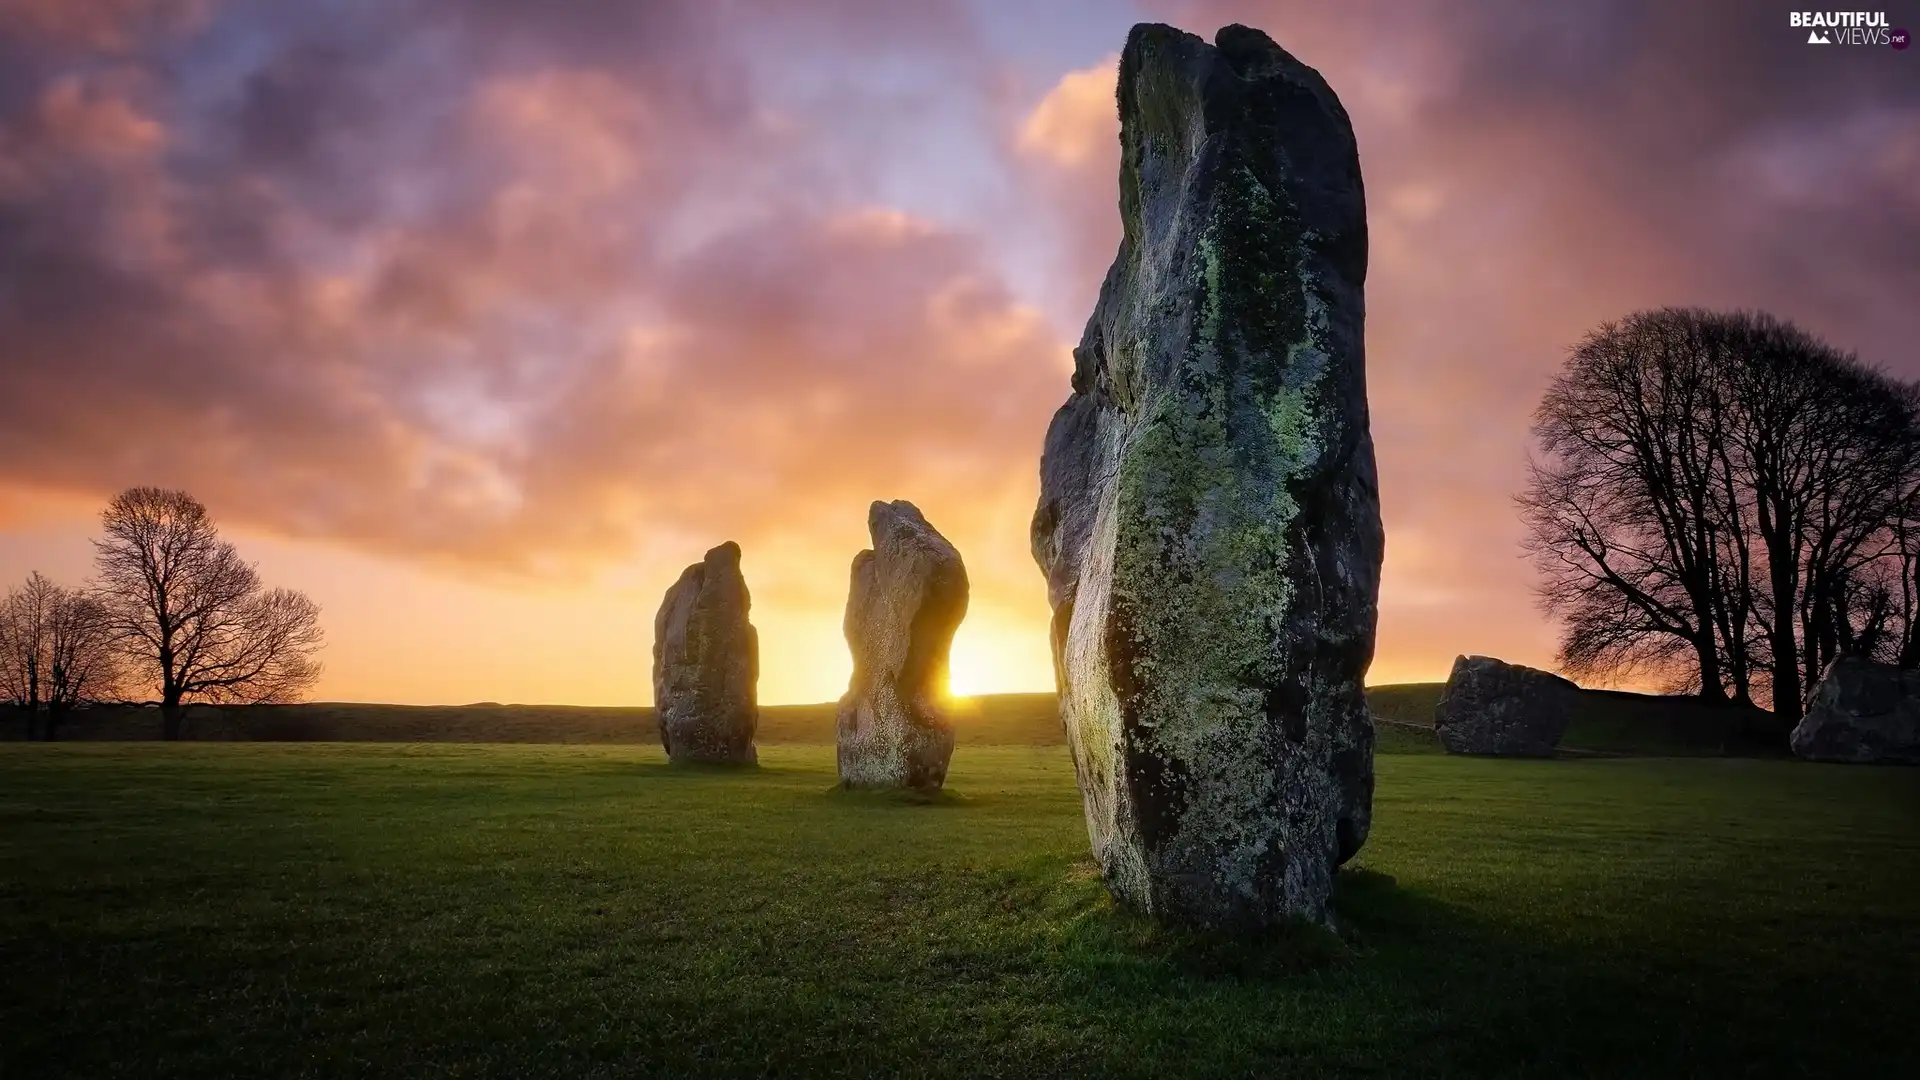 boulders, Wiltshire County, Neolithic Boulders, trees, Carnac Stones, England, Avebury Village, viewes, Sunrise, rocks